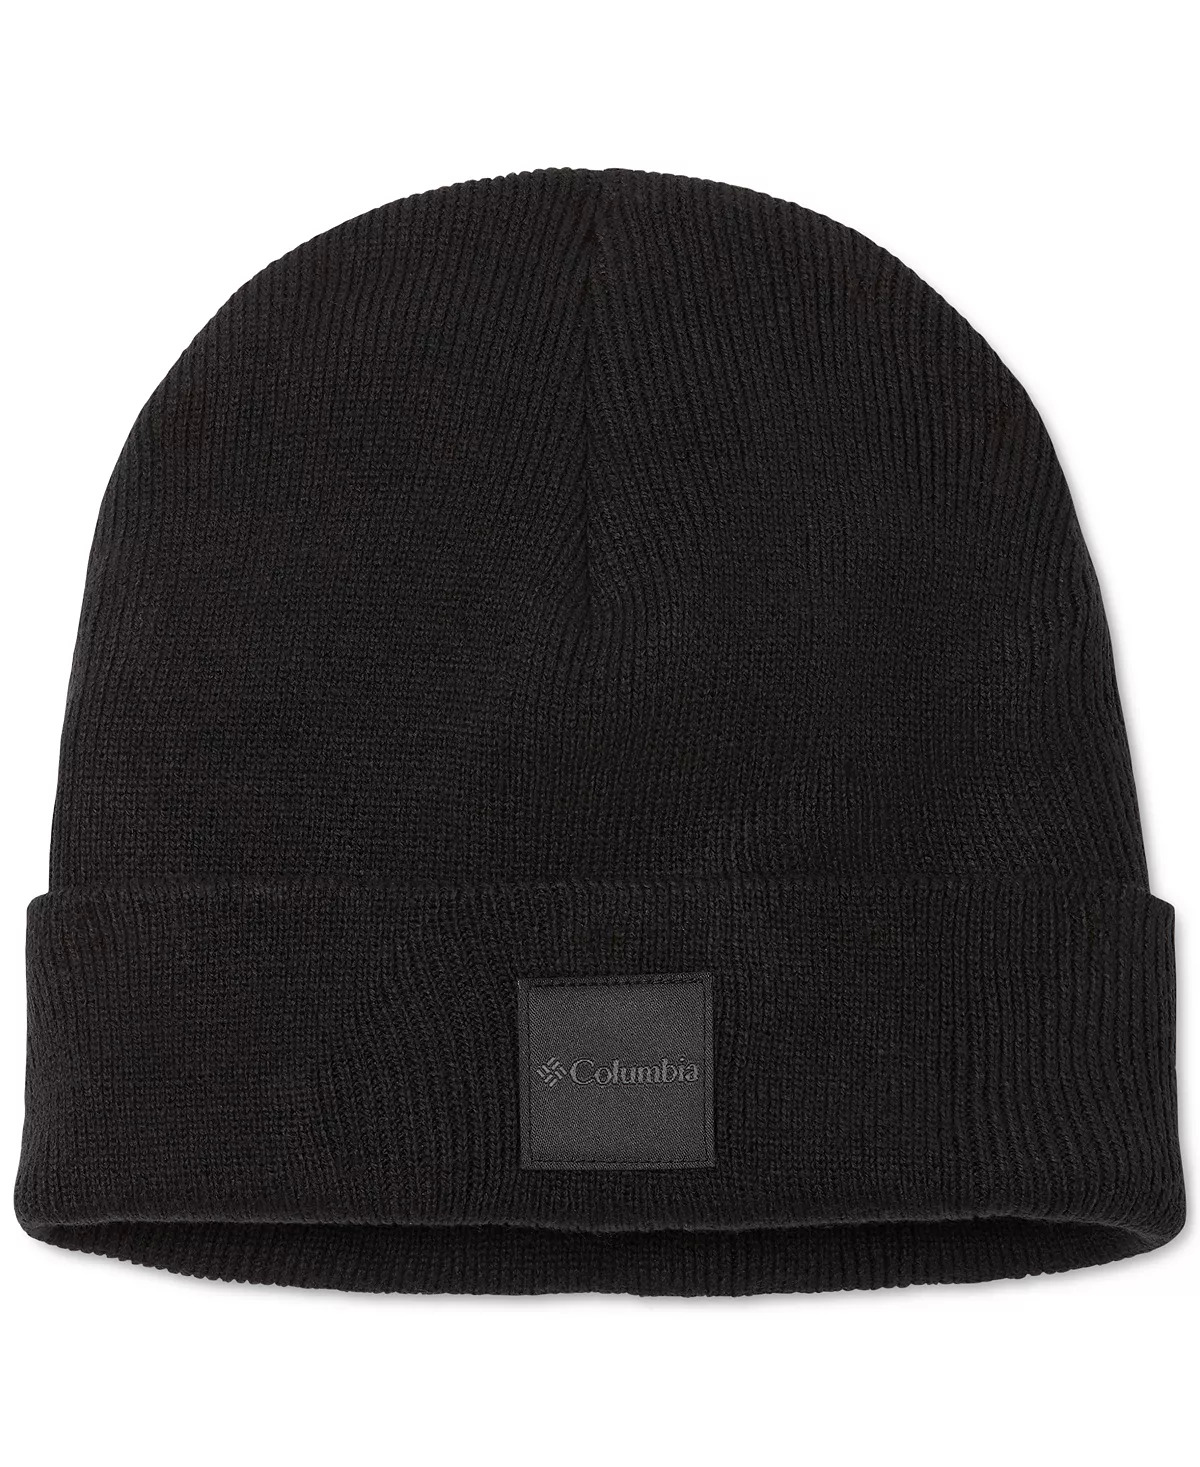 Columbia Men's or Women's City Trek Heavyweight Knit Beanie Hat (Various Colors) $7.45 + Free Store Pickup at Macy's or F/S on $25+